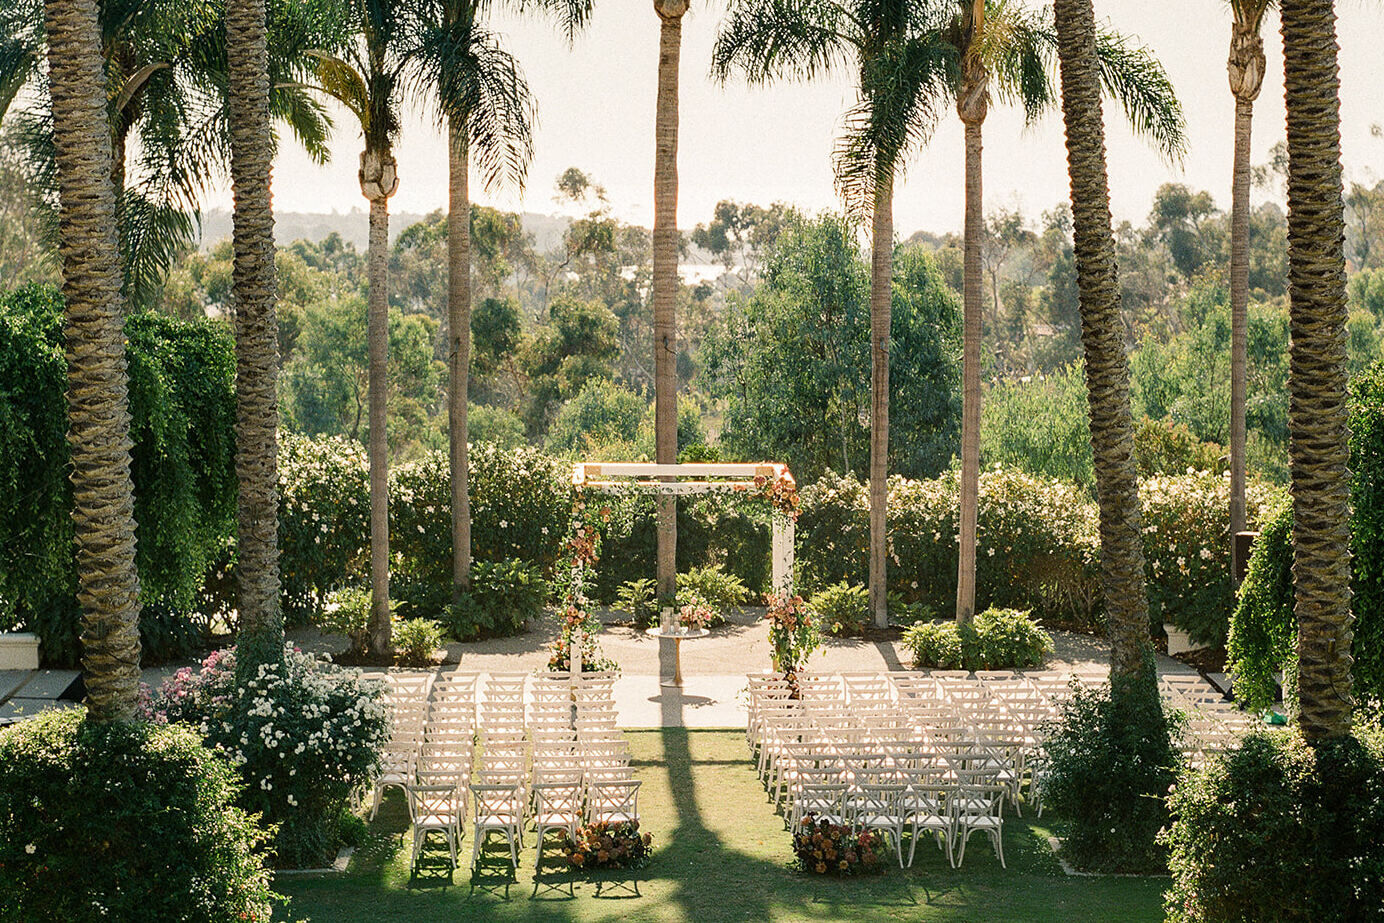 An elevated view of a palm-tree surrounded lawn set up for an outdoor wedding ceremony at the Park Hyatt Aviara Resort in California.